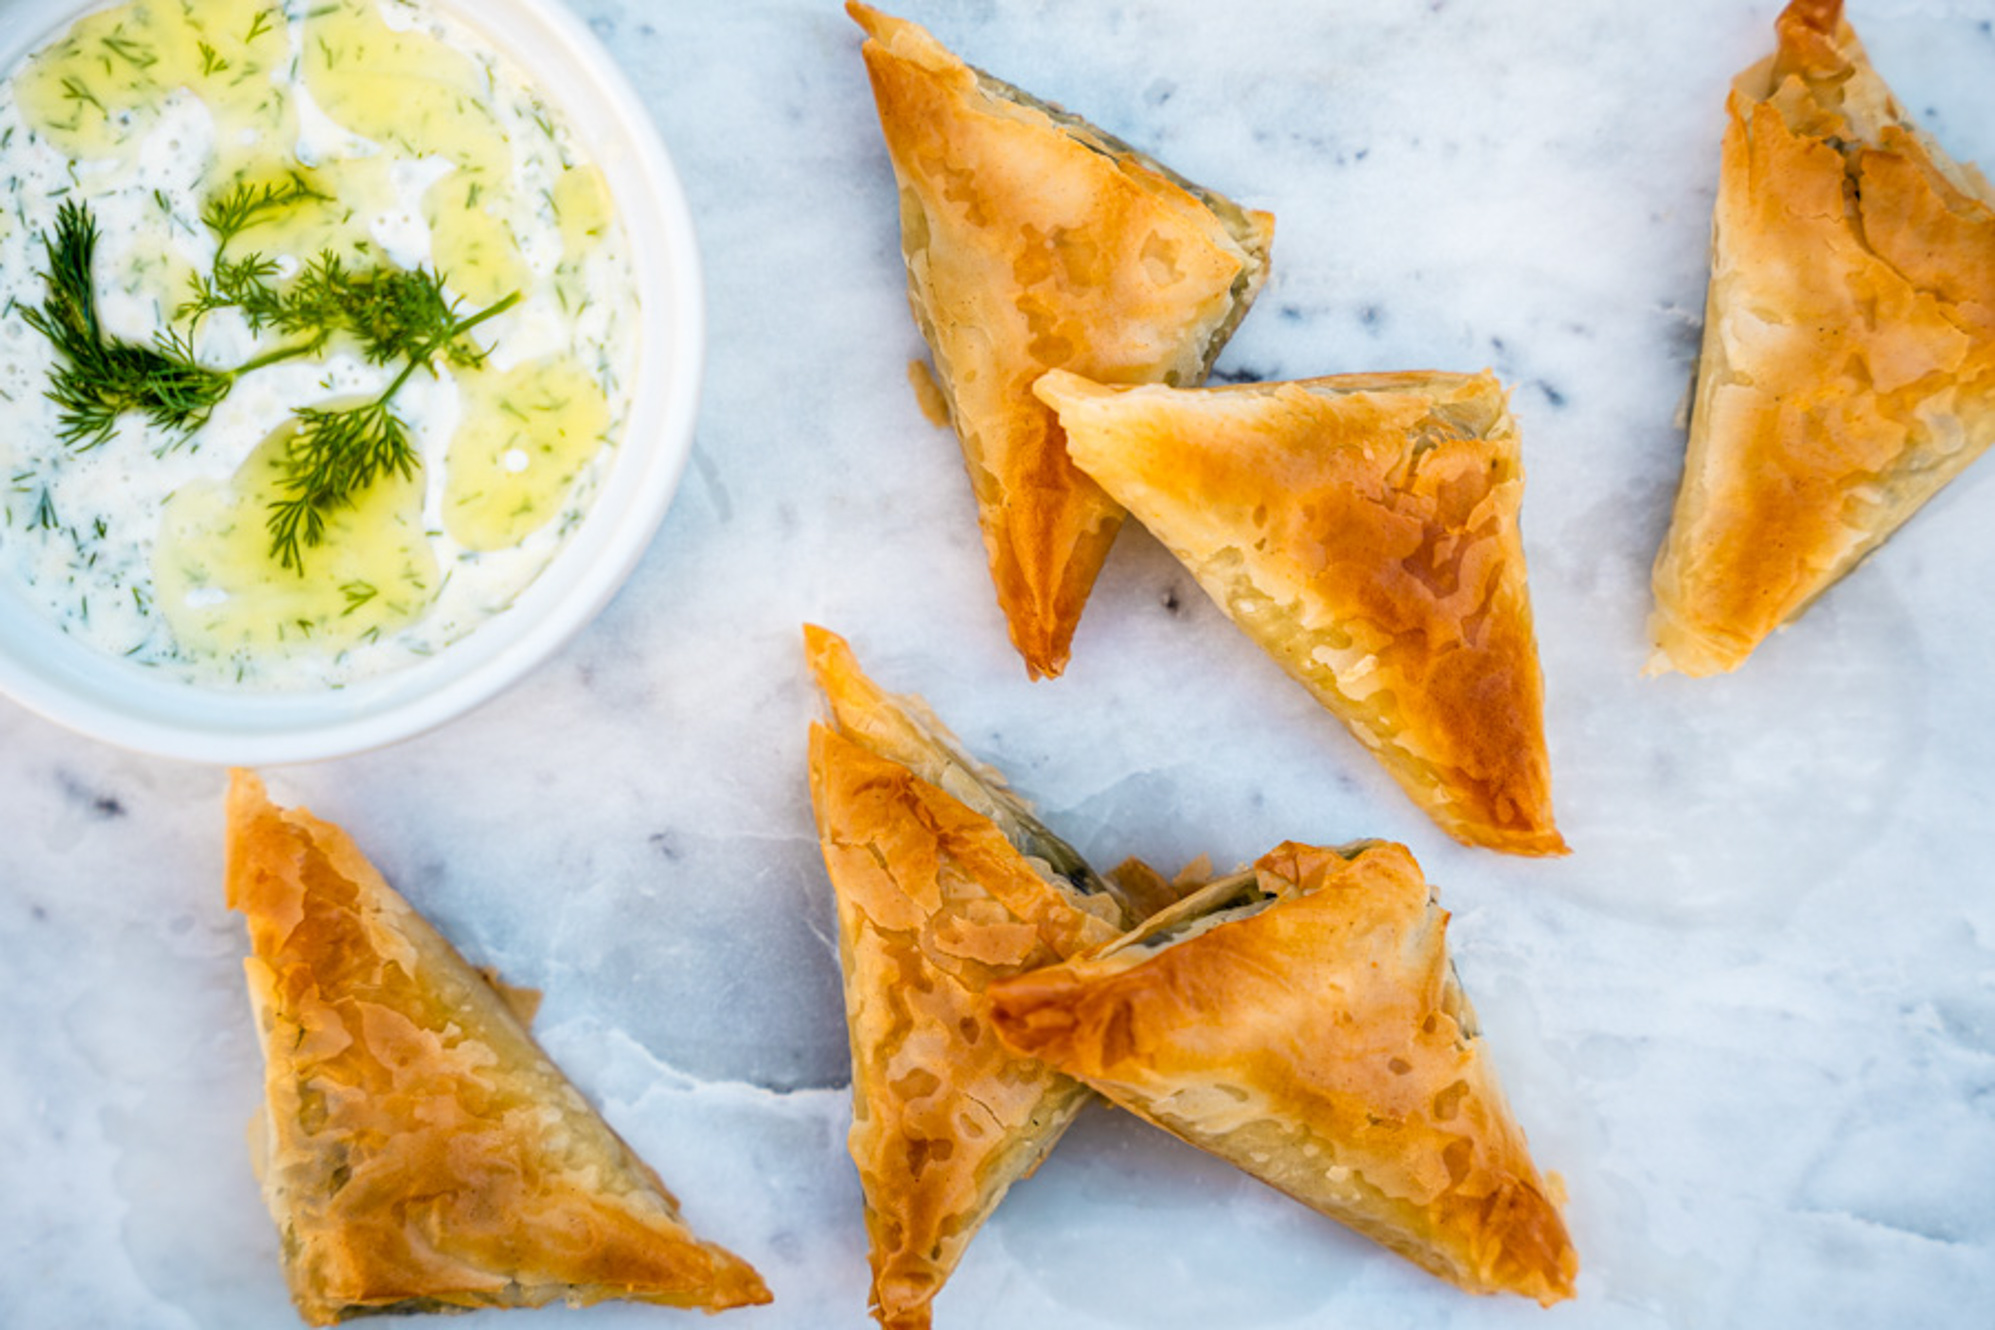 Spanakopita comes with a tzatziki sauce loaded with dill flavors.